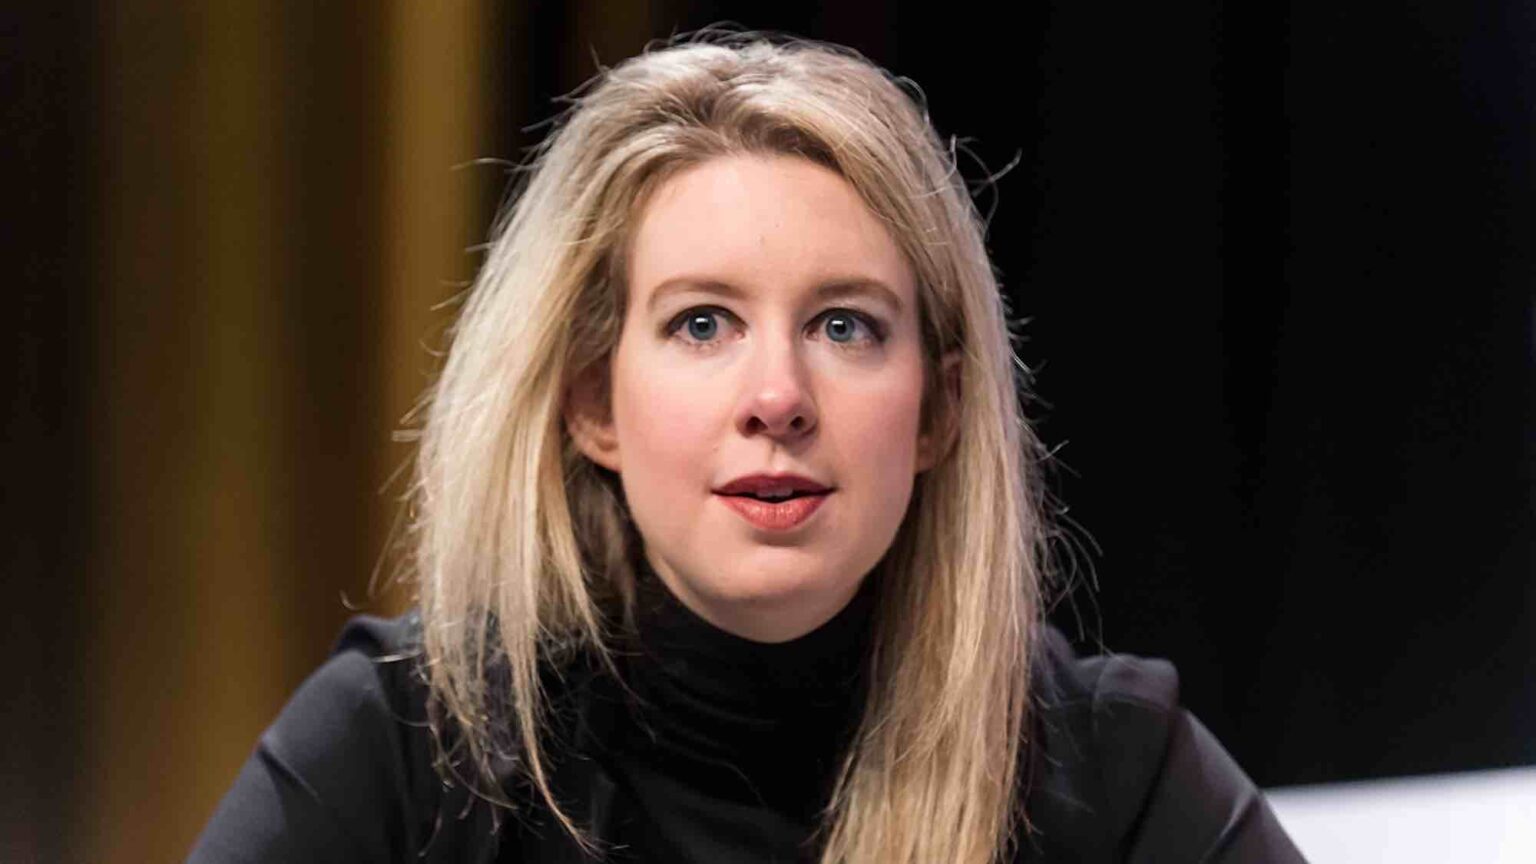 What's happened to Theranos founder Elizabeth Holmes during her messy trial? Get the latest details as what's going on in the case.